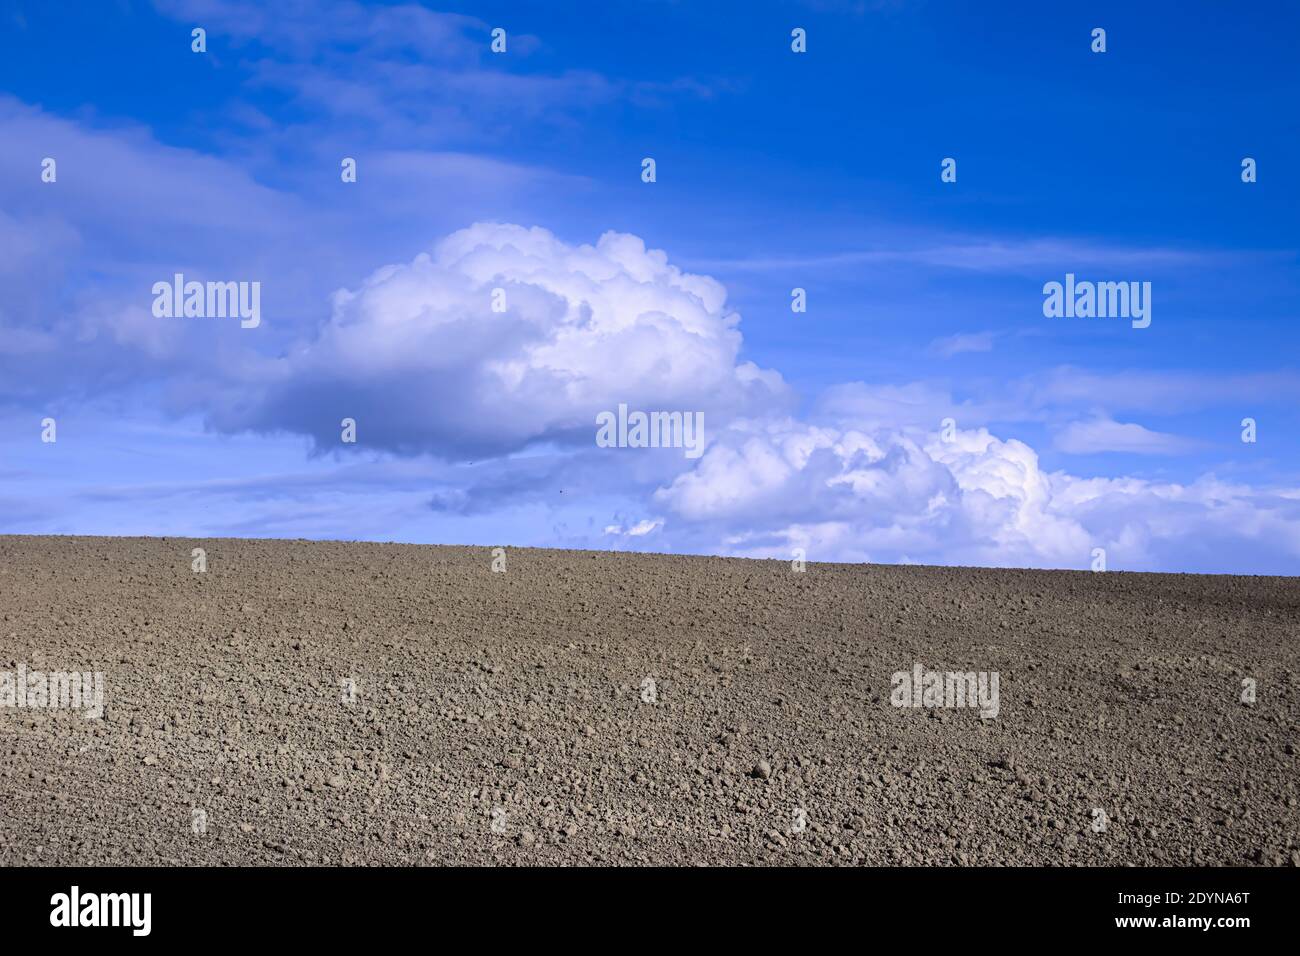 Sustainable agriculture: plowed land with blue sky and clouds. Stock Photo